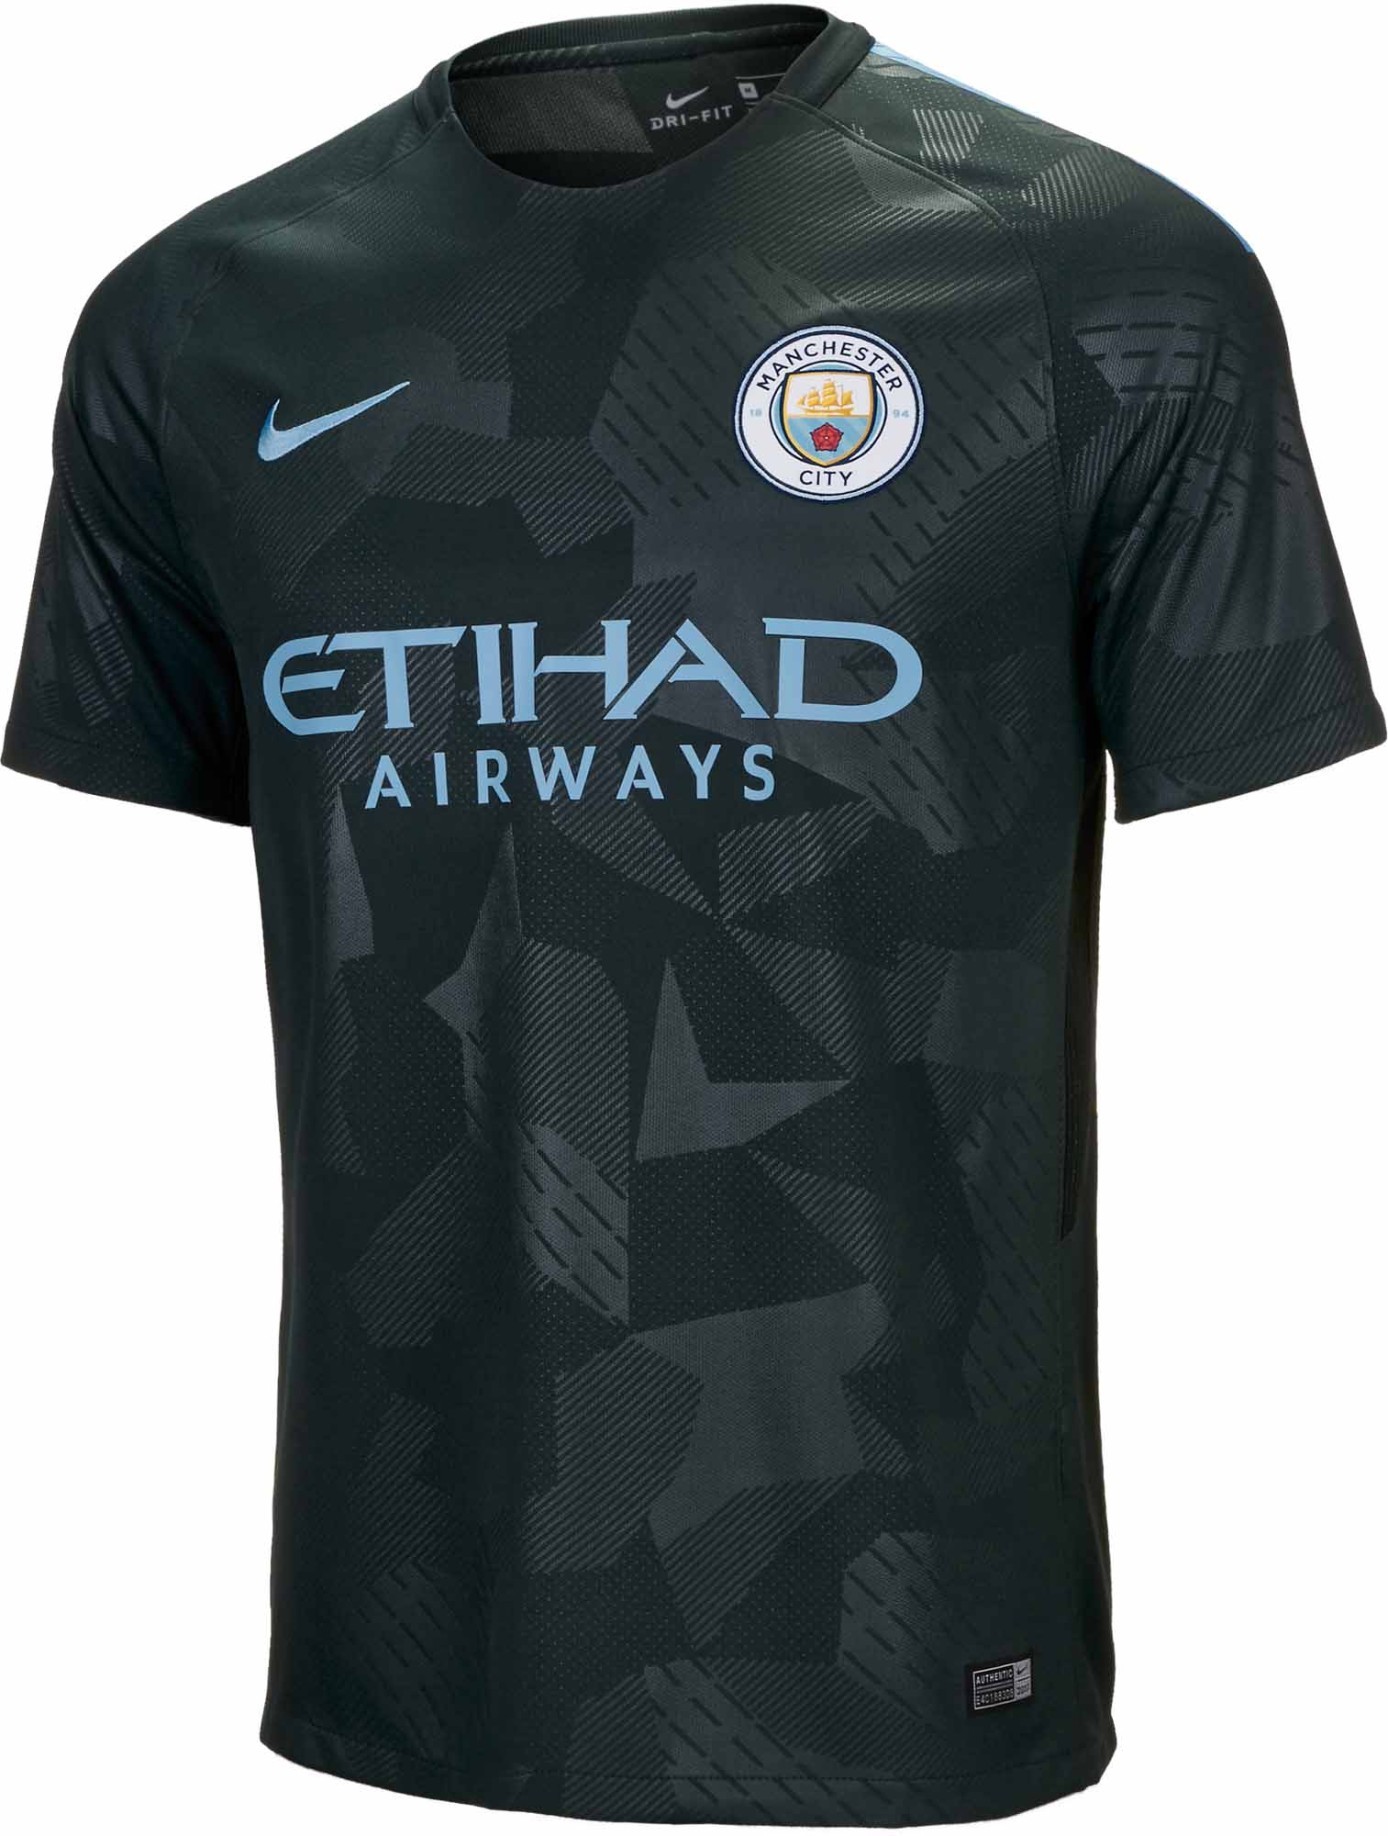 Man City 2017-18 kit: Manchester City unveil new jersey for 2017-18